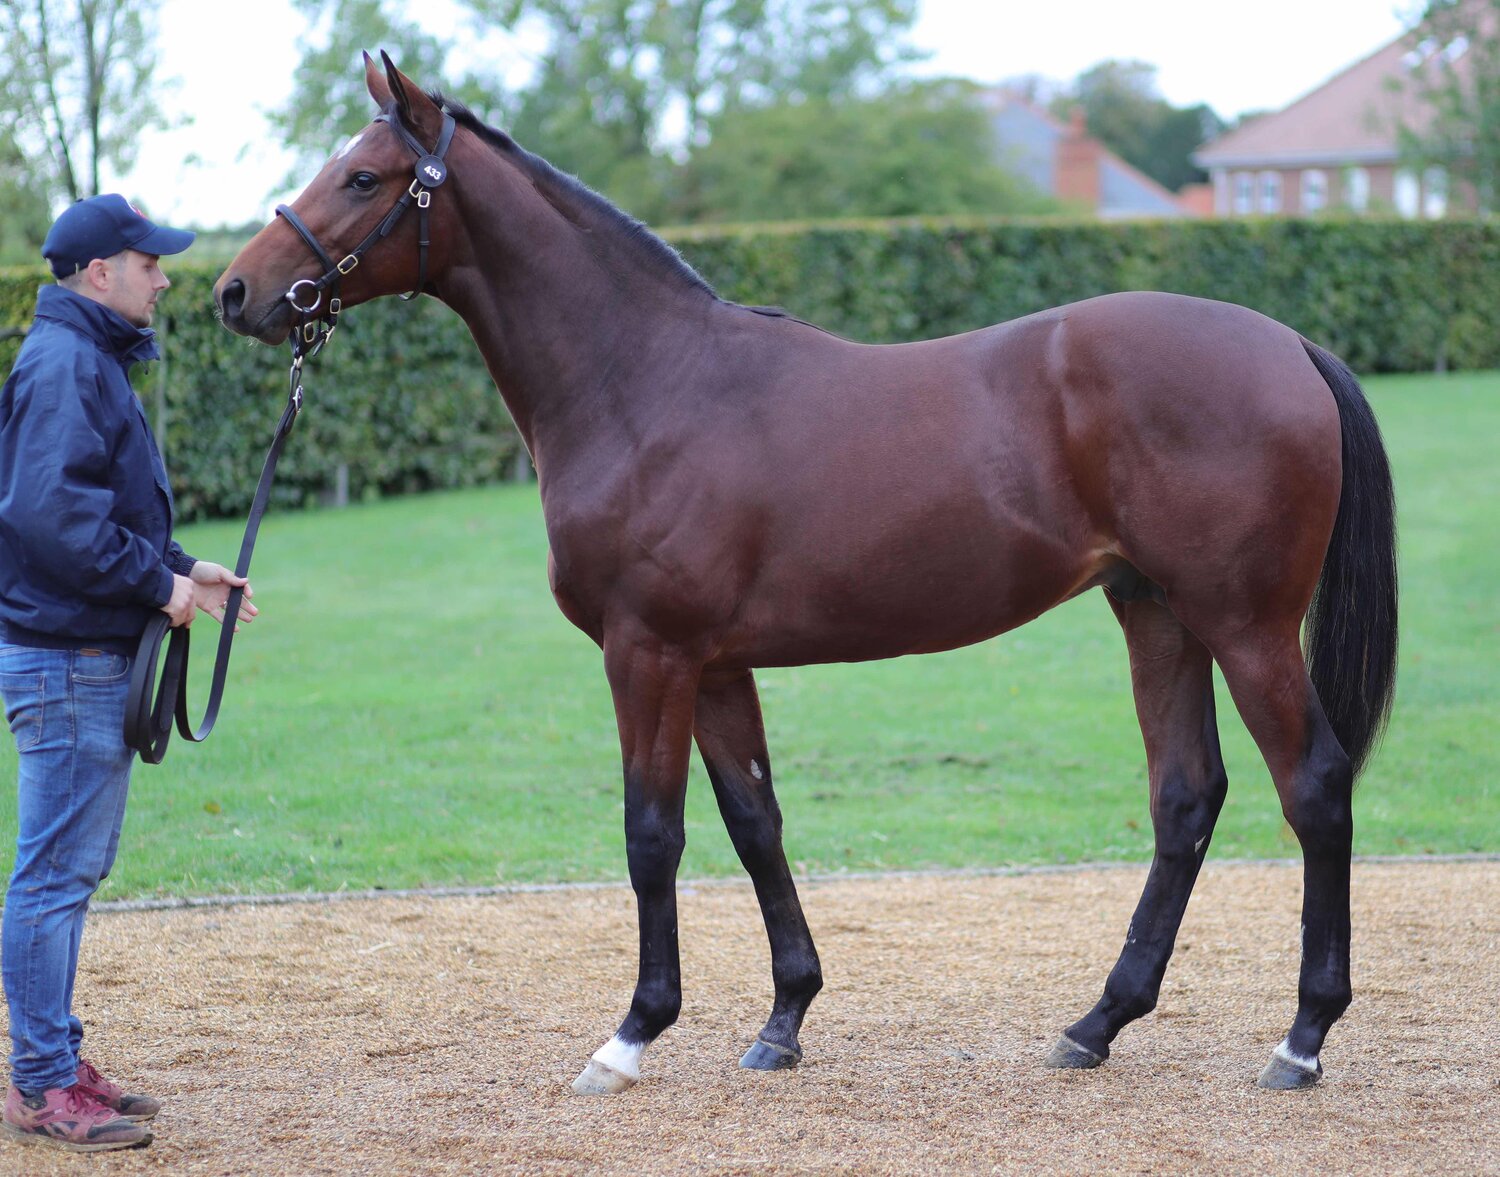 Lot 433 - Lope de Vega x Shahad (Galileo), purchased at the Tattersall’s October Yearling Sale.